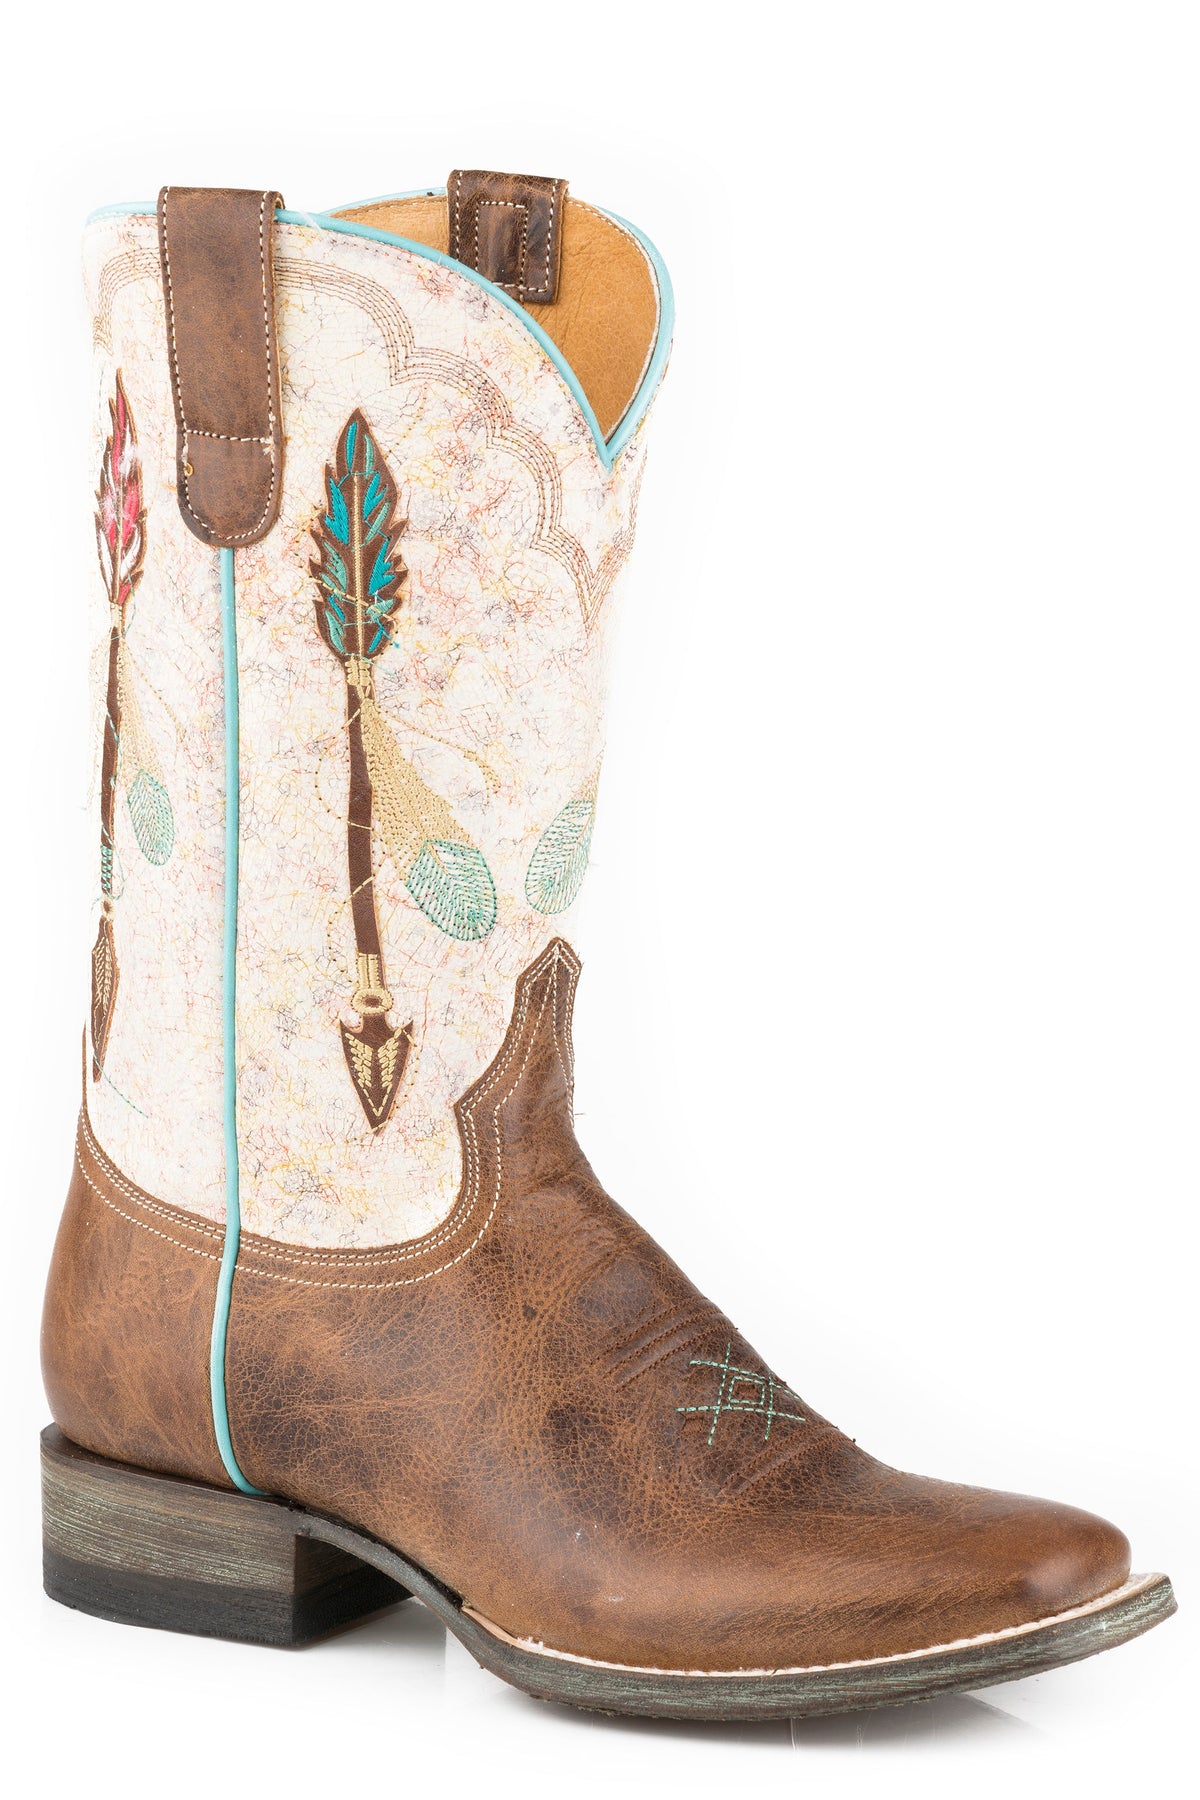 Roper Womens Vintage Tan Vamp Boot With Embroidered Arrow Design